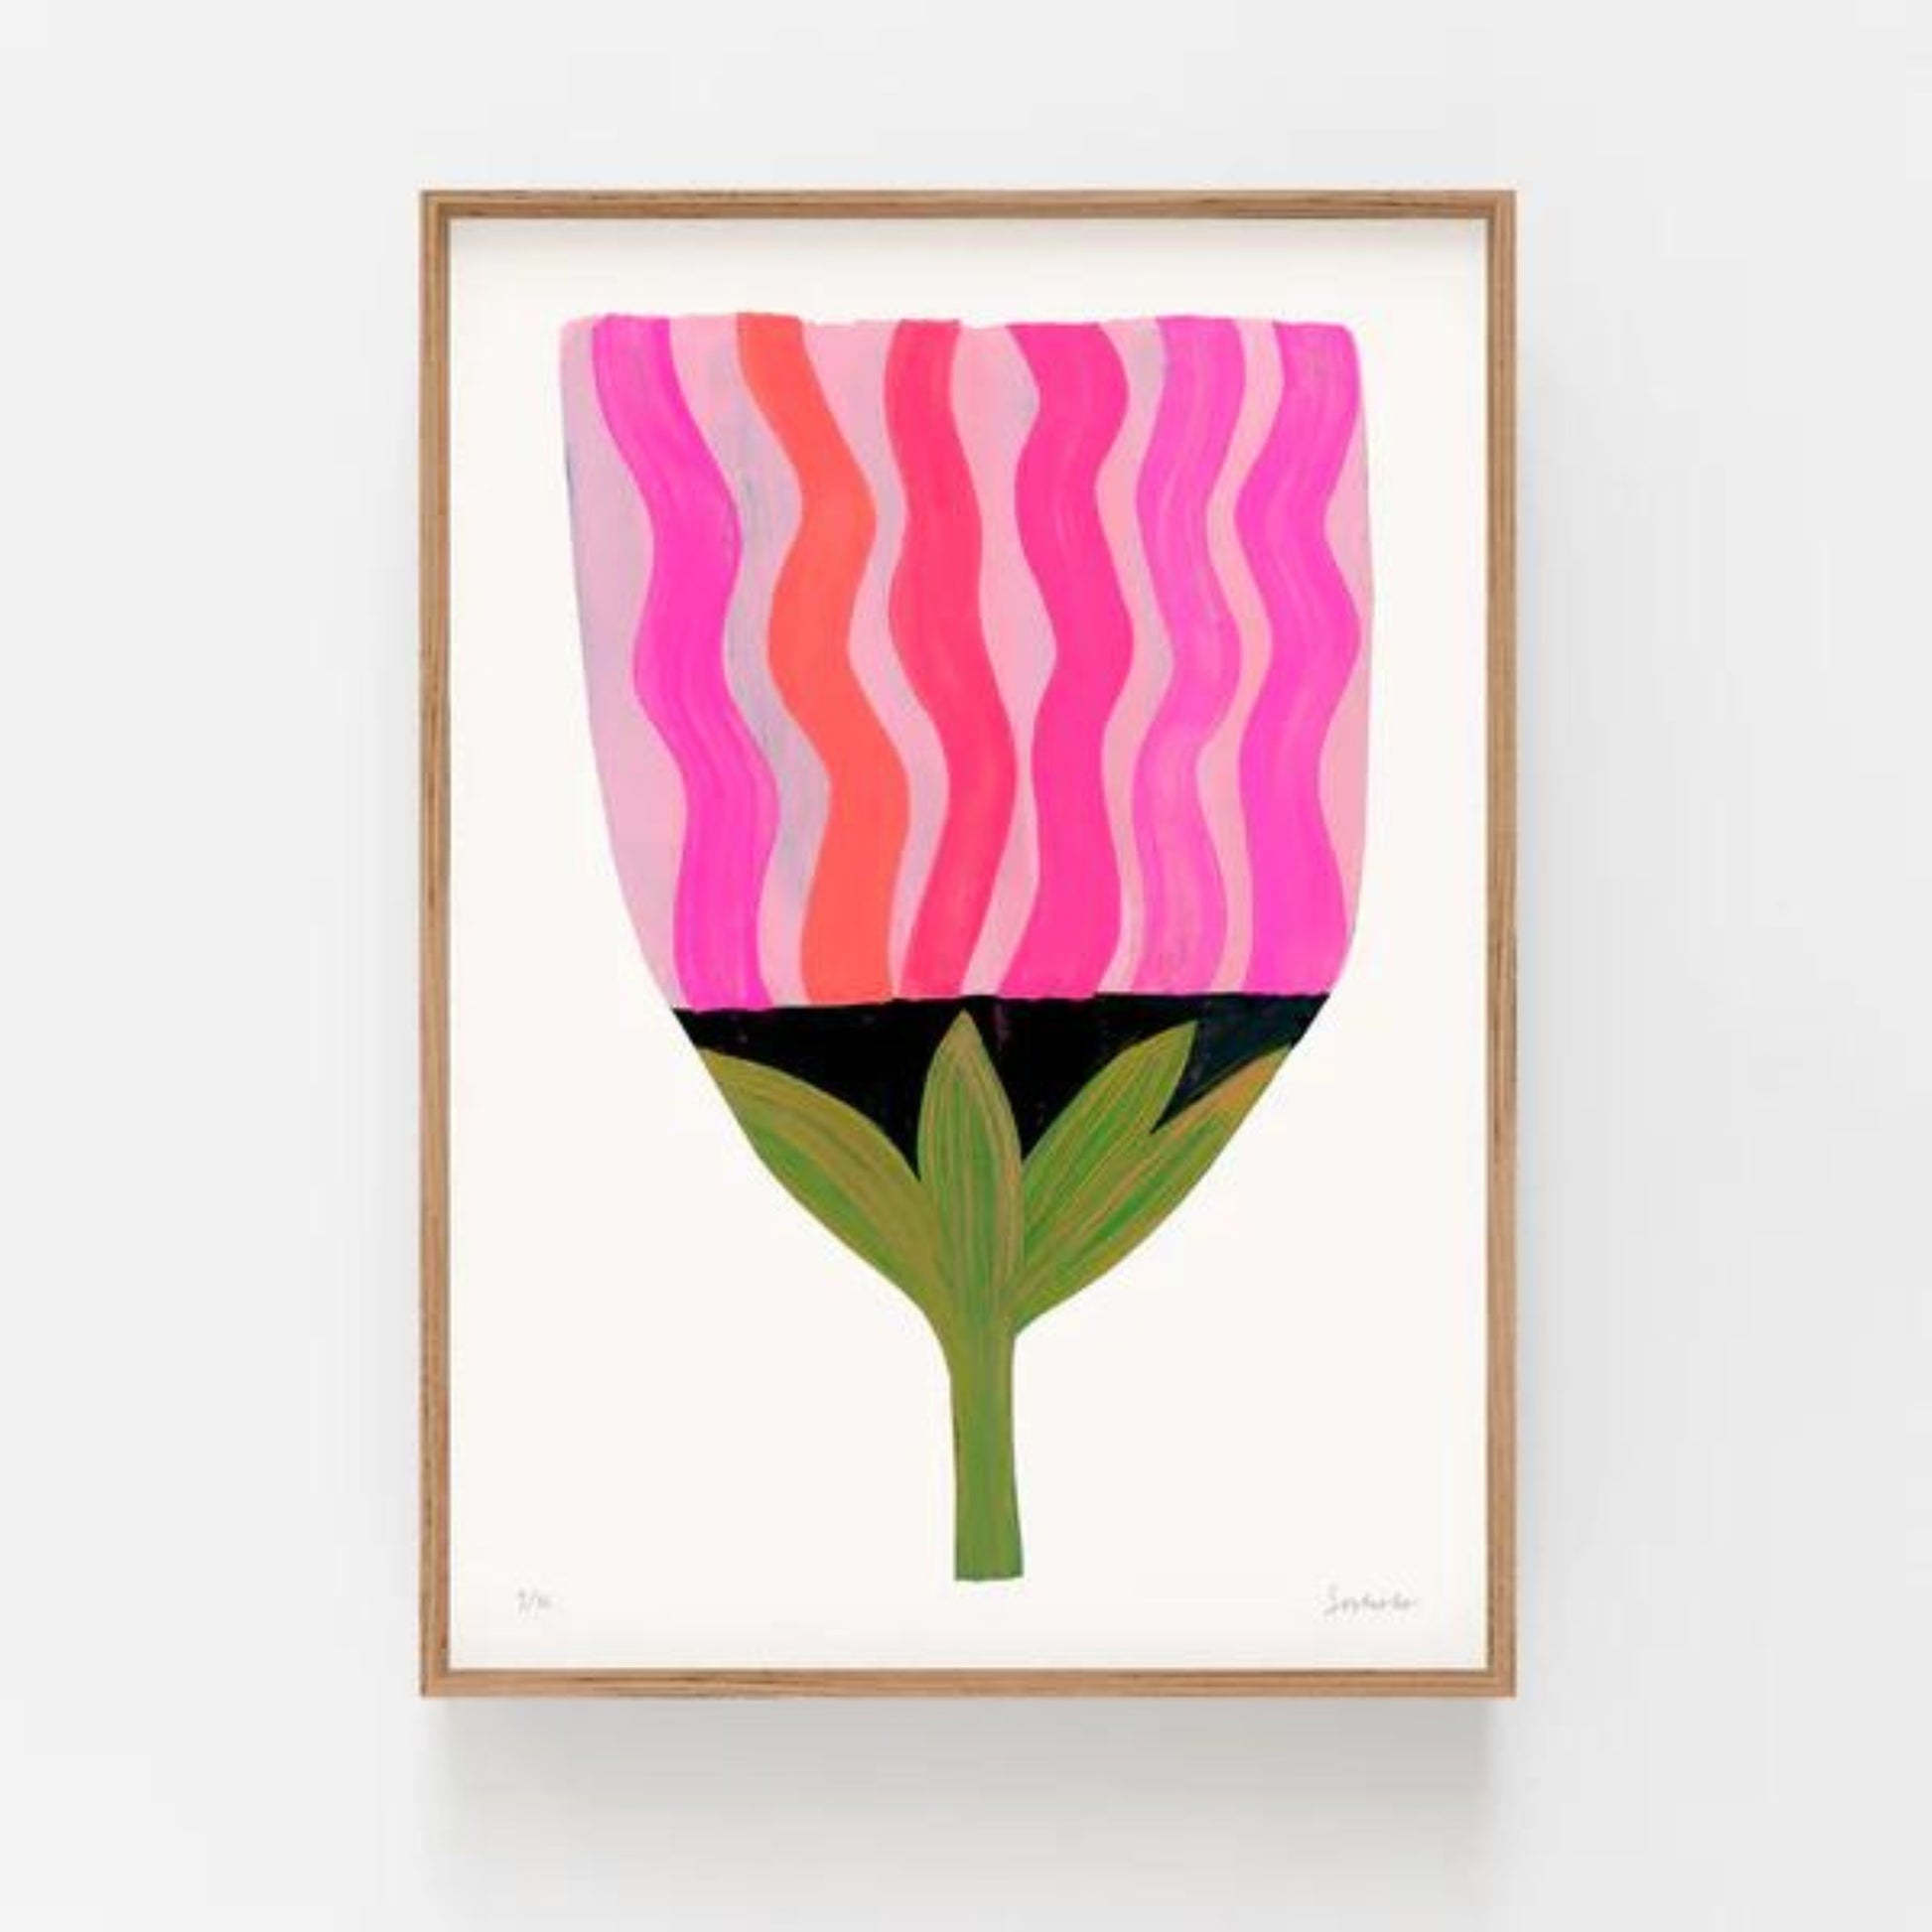 Framed abstract print of tulip with multi coloured pink stripes and green stem. 